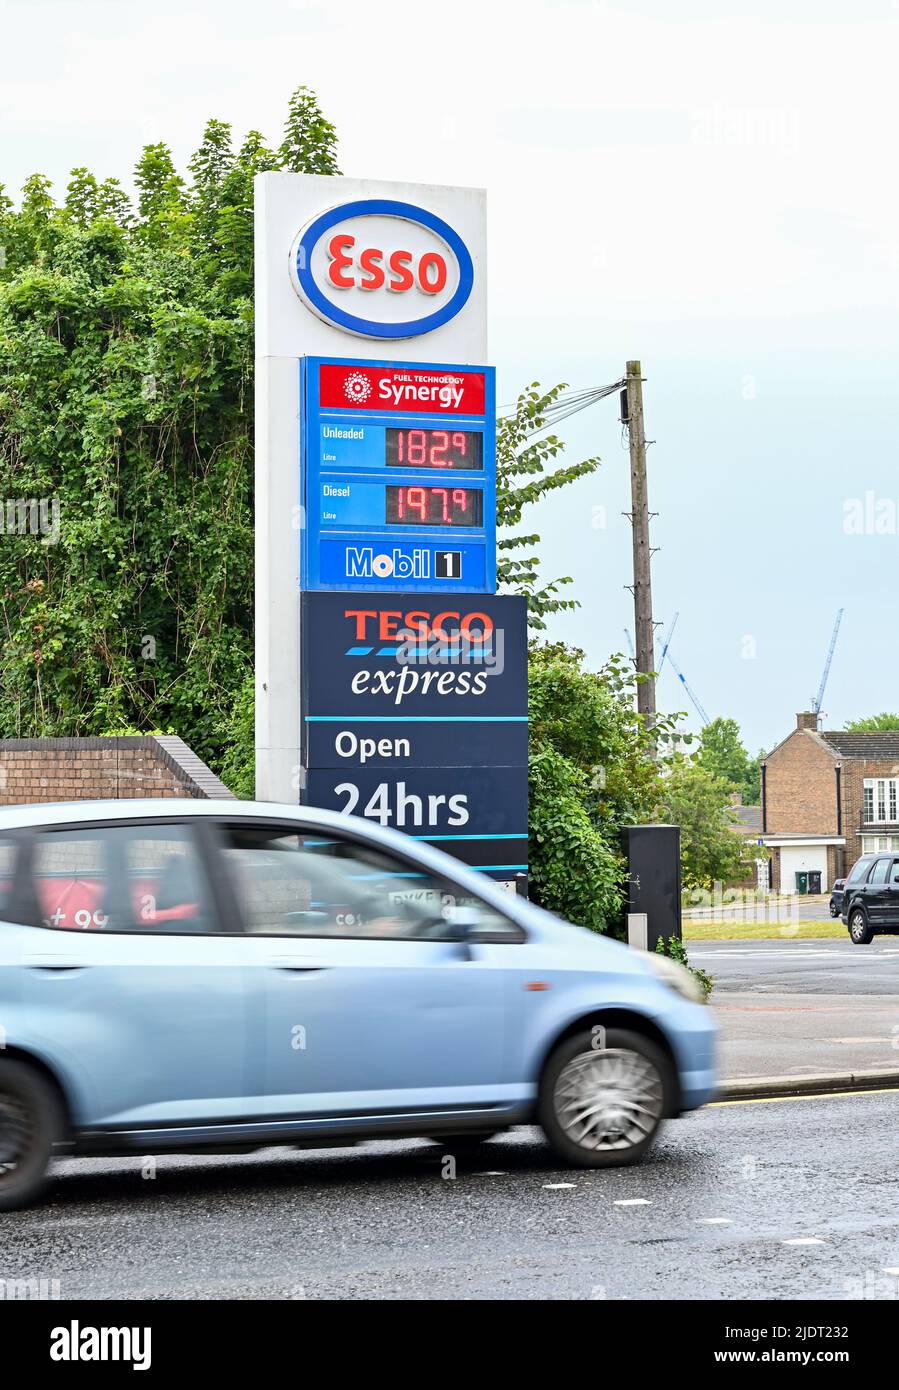 Brighton UK 23rd June 2022 - High fuel prices at an Esso garage in Hove , Brighton as the cost of living crisis continues in the UK : Credit Simon Dack / Alamy Live News Stock Photo